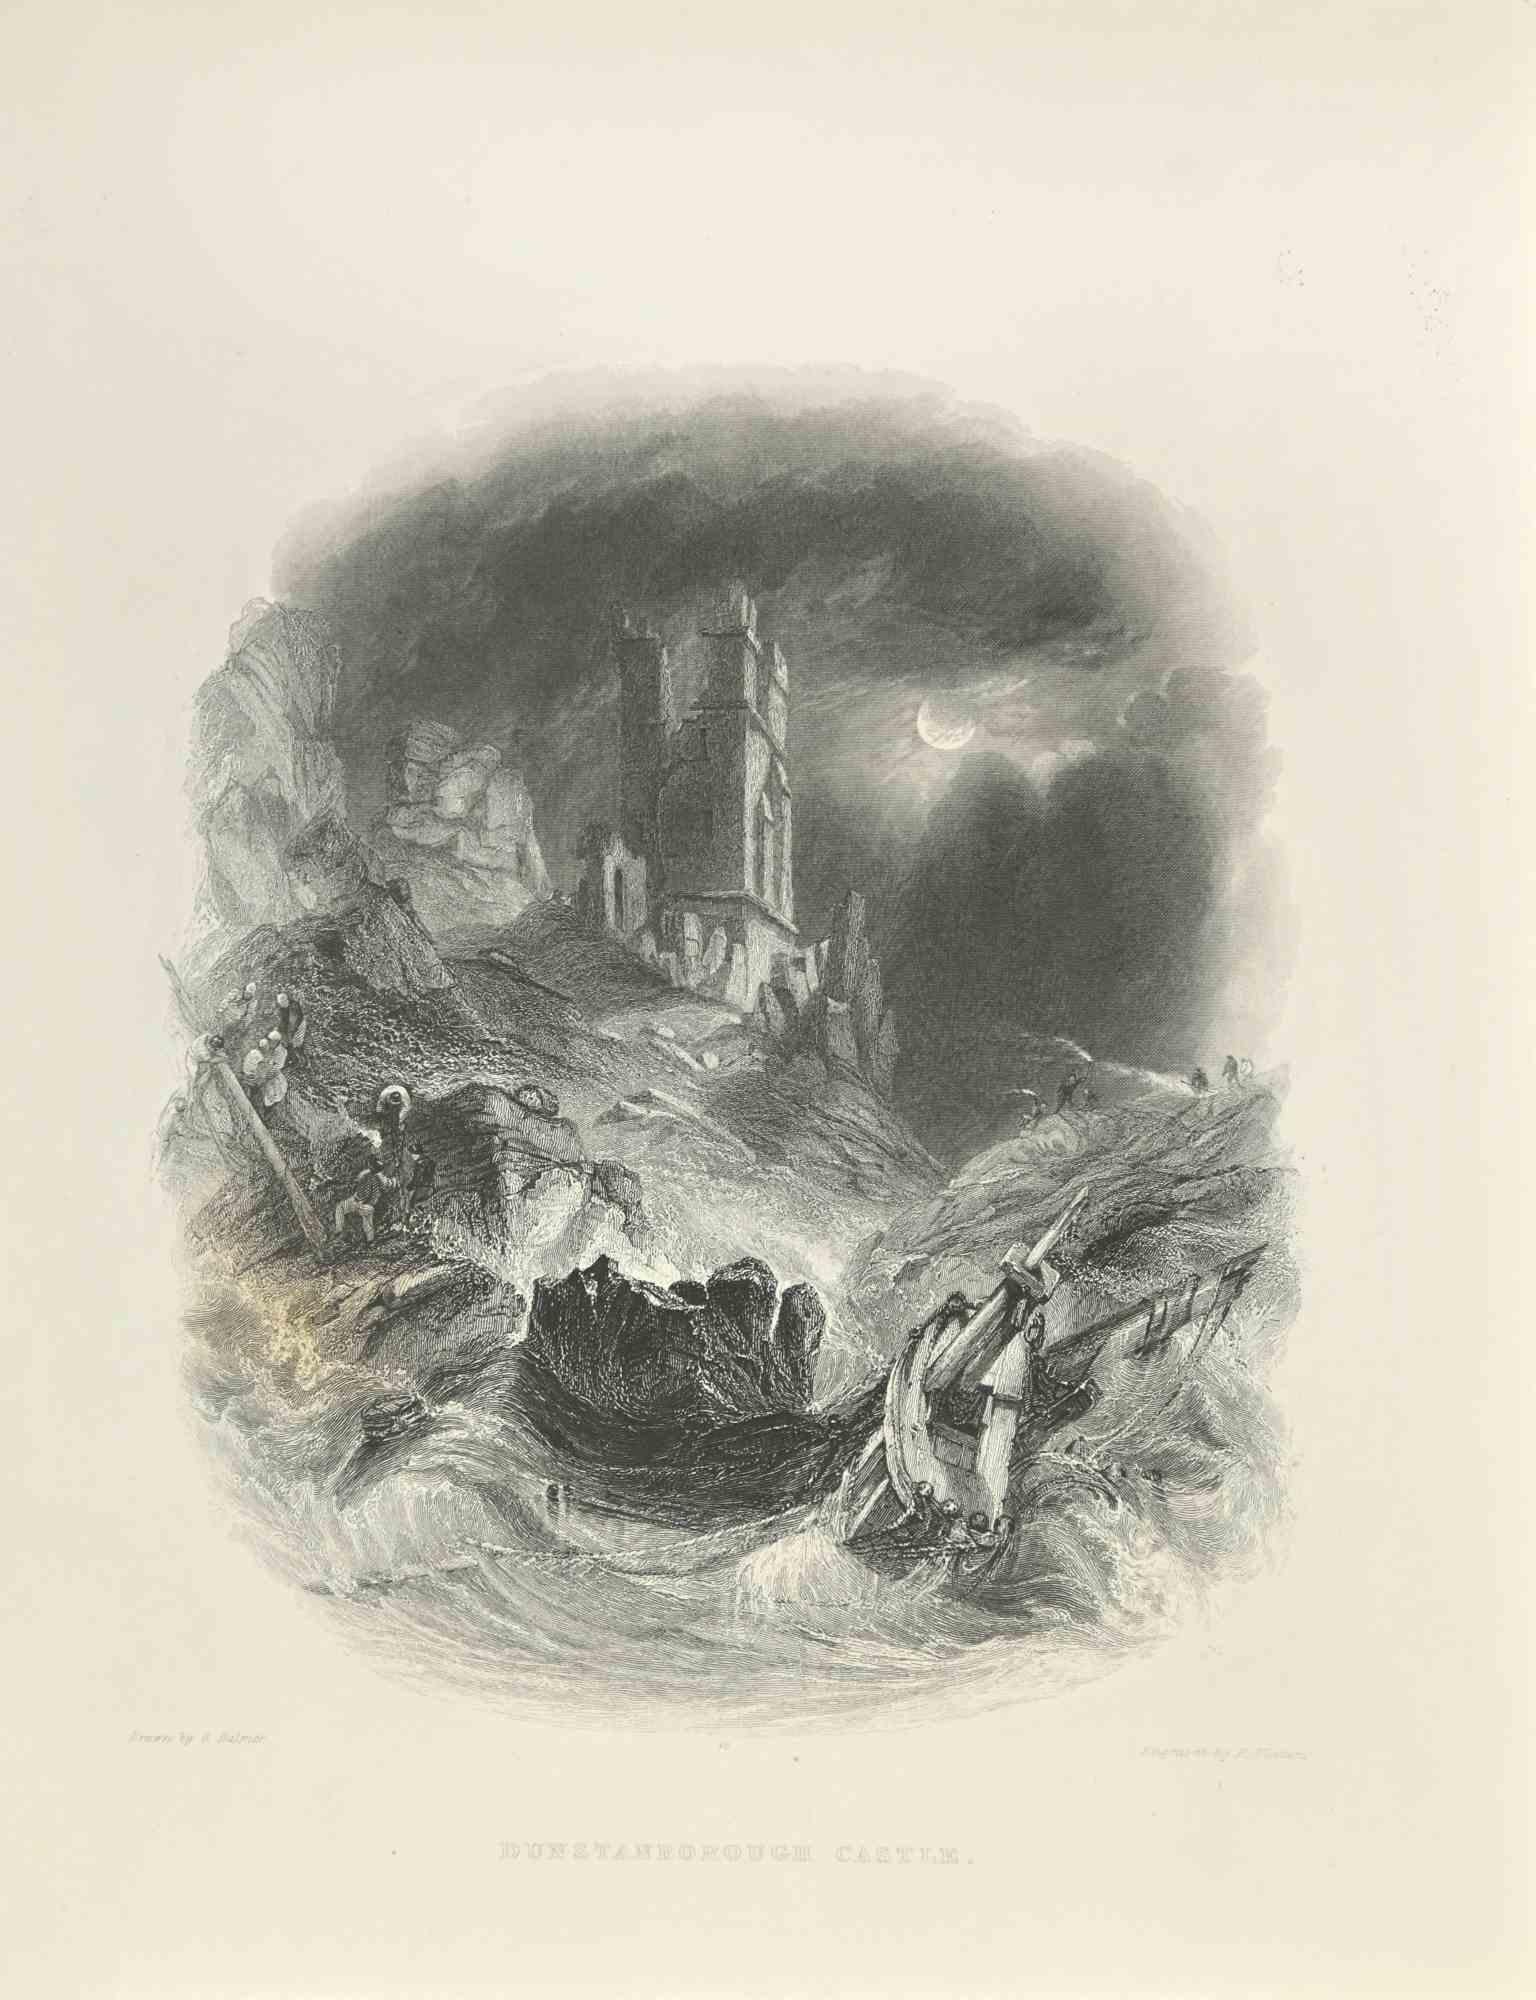 Dunstanborough Castle  is an engraving realized in 1845 by E.Finden.

Signed in plate.

The artwork is realized in a well-balanced composition.